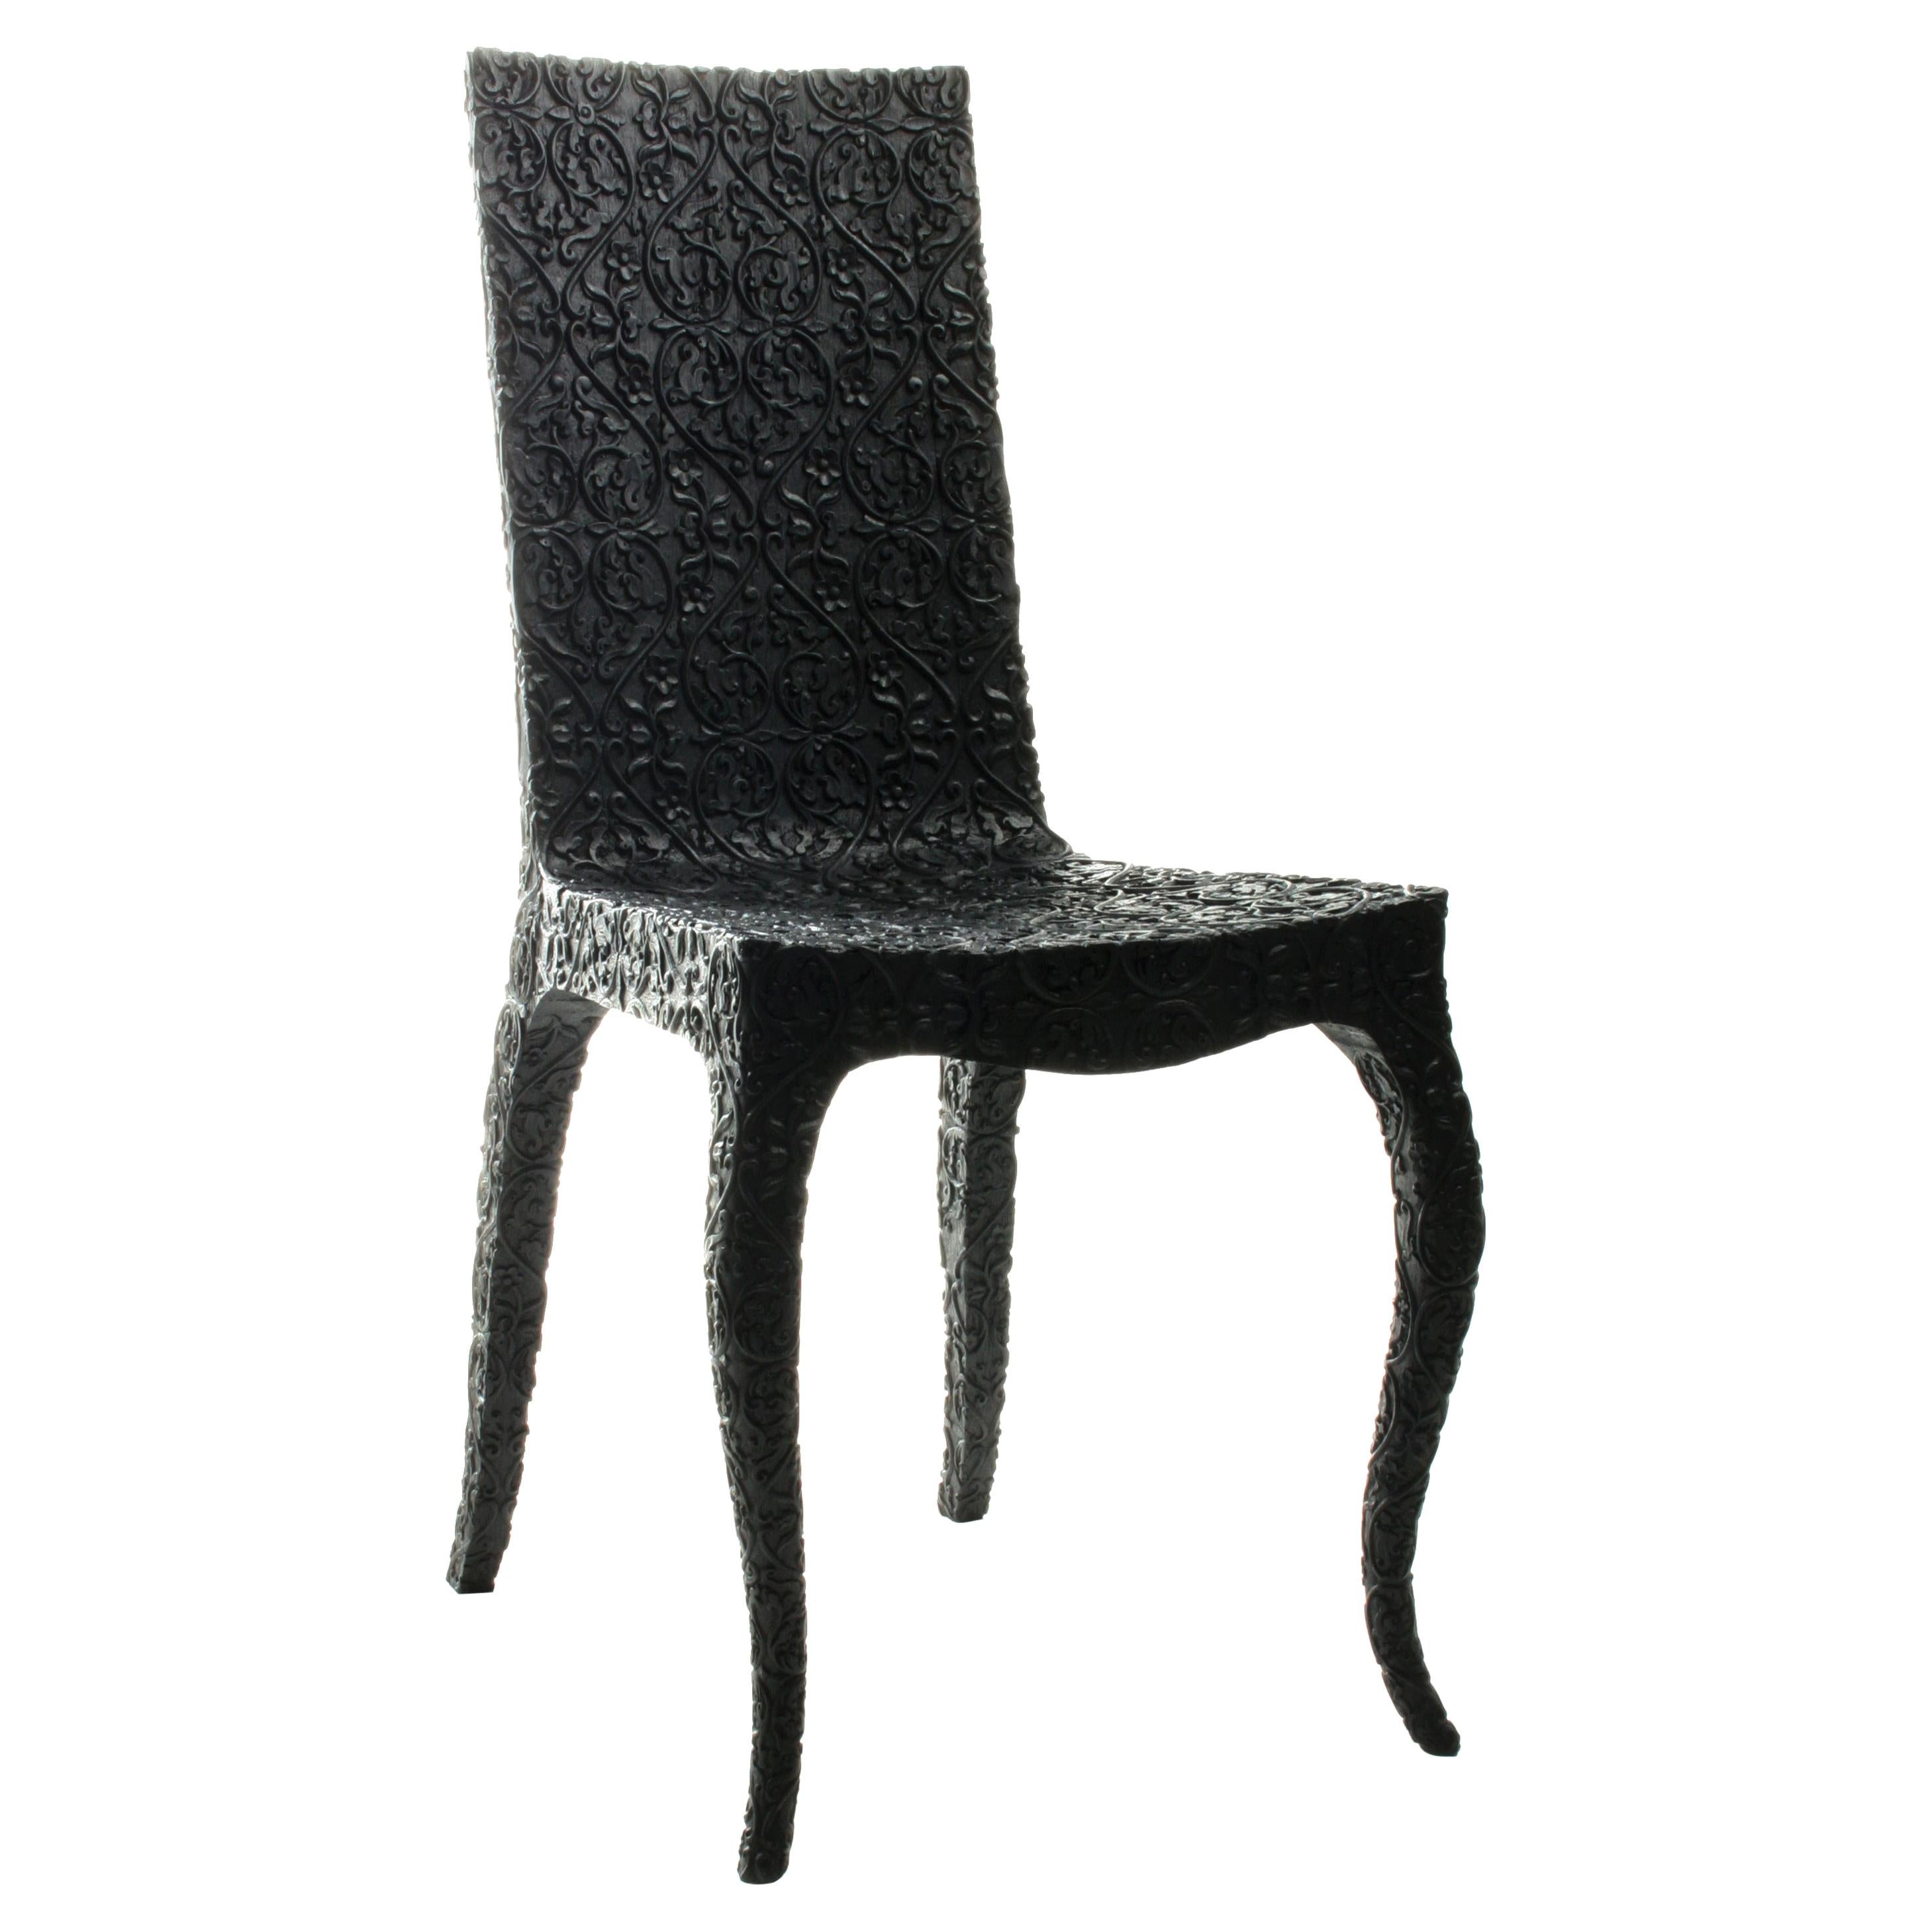 Carved Chair, by Marcel Wanders, Hand-Carved Chair, 2008, Black, Limited For Sale